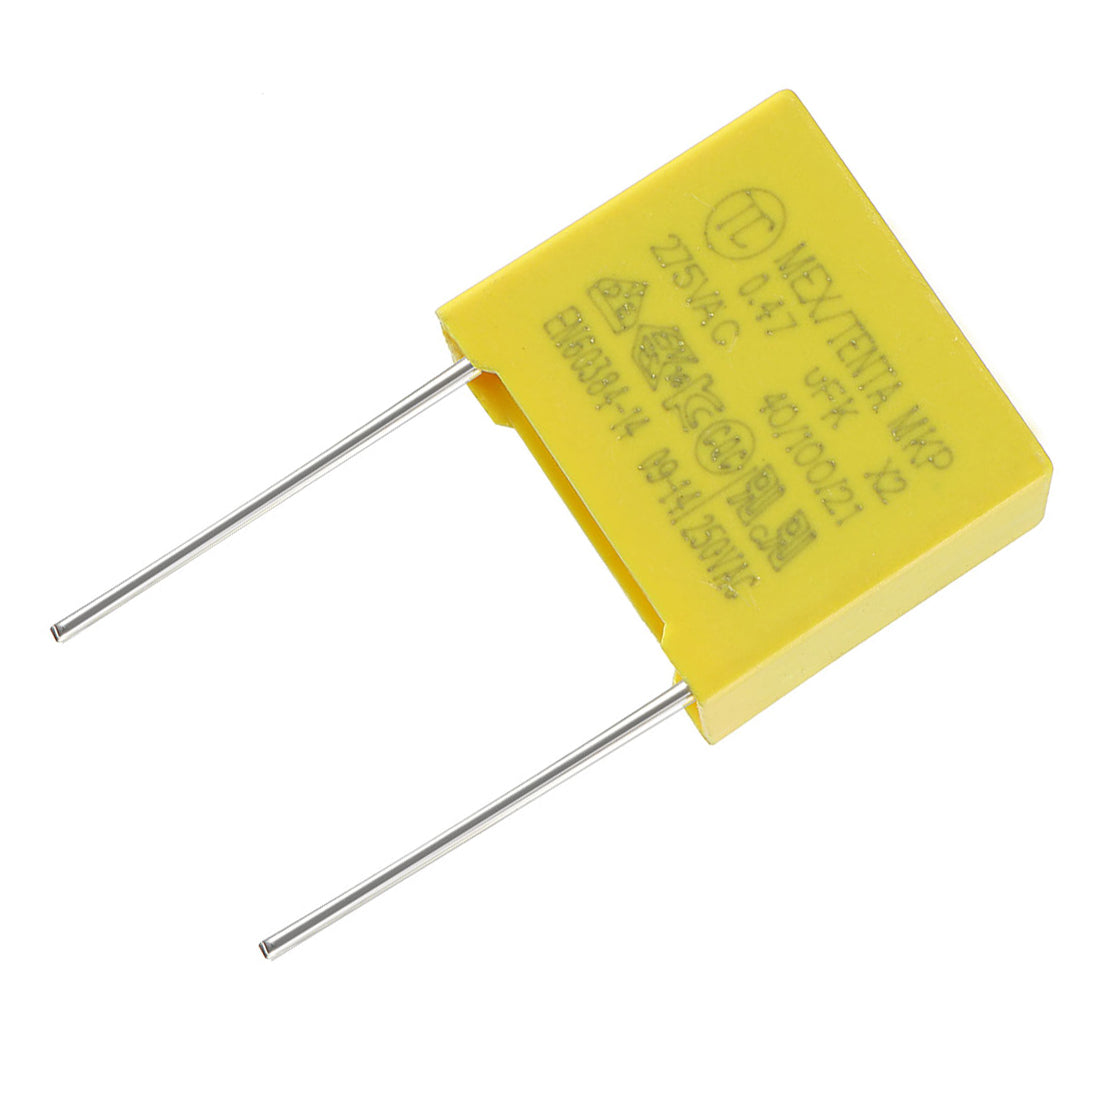 uxcell Uxcell Safety Capacitors Polypropylene Film 0.47uF 275VAC X2 MKP